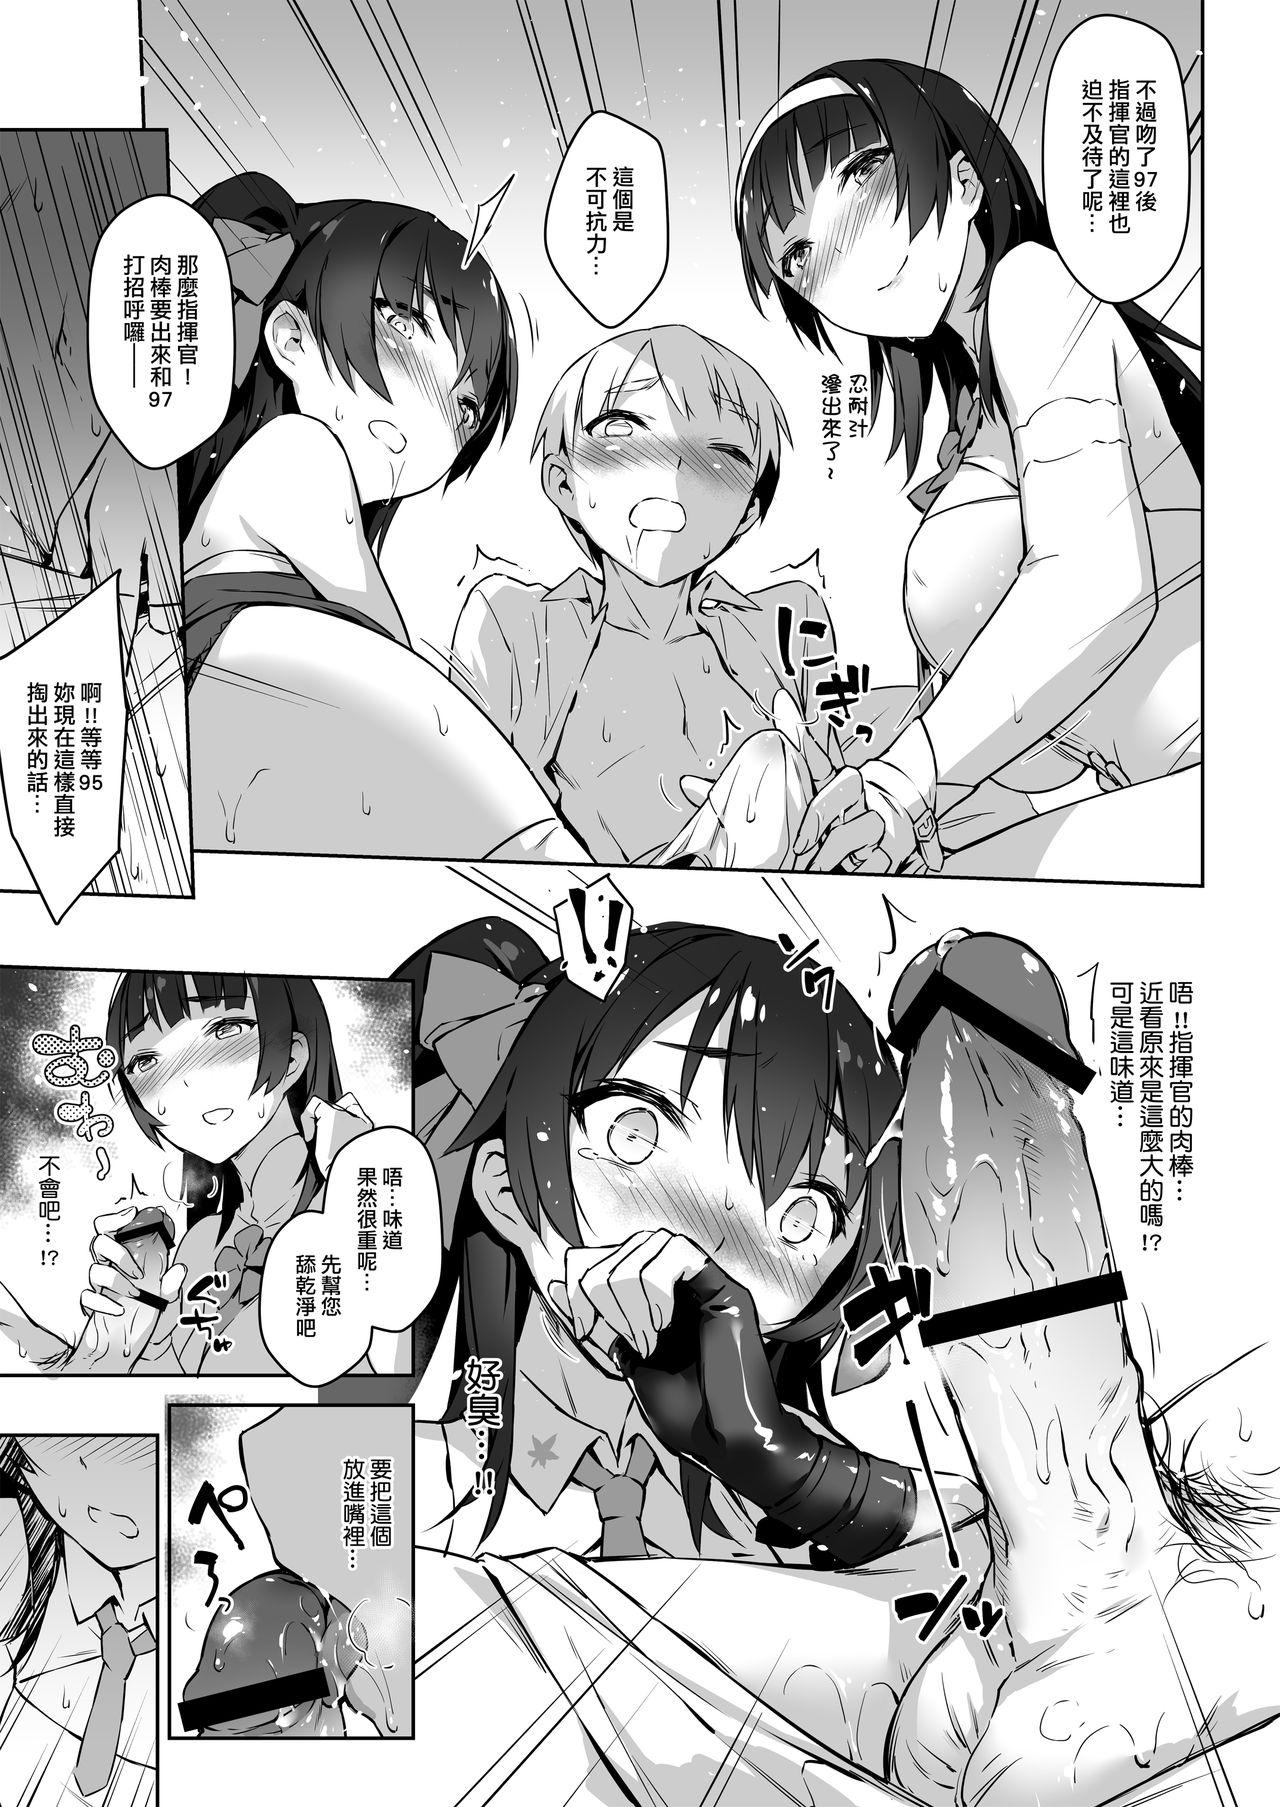 Whooty Type 95 Type 97, Let Sister Teaches You!! - Girls frontline Classroom - Page 11